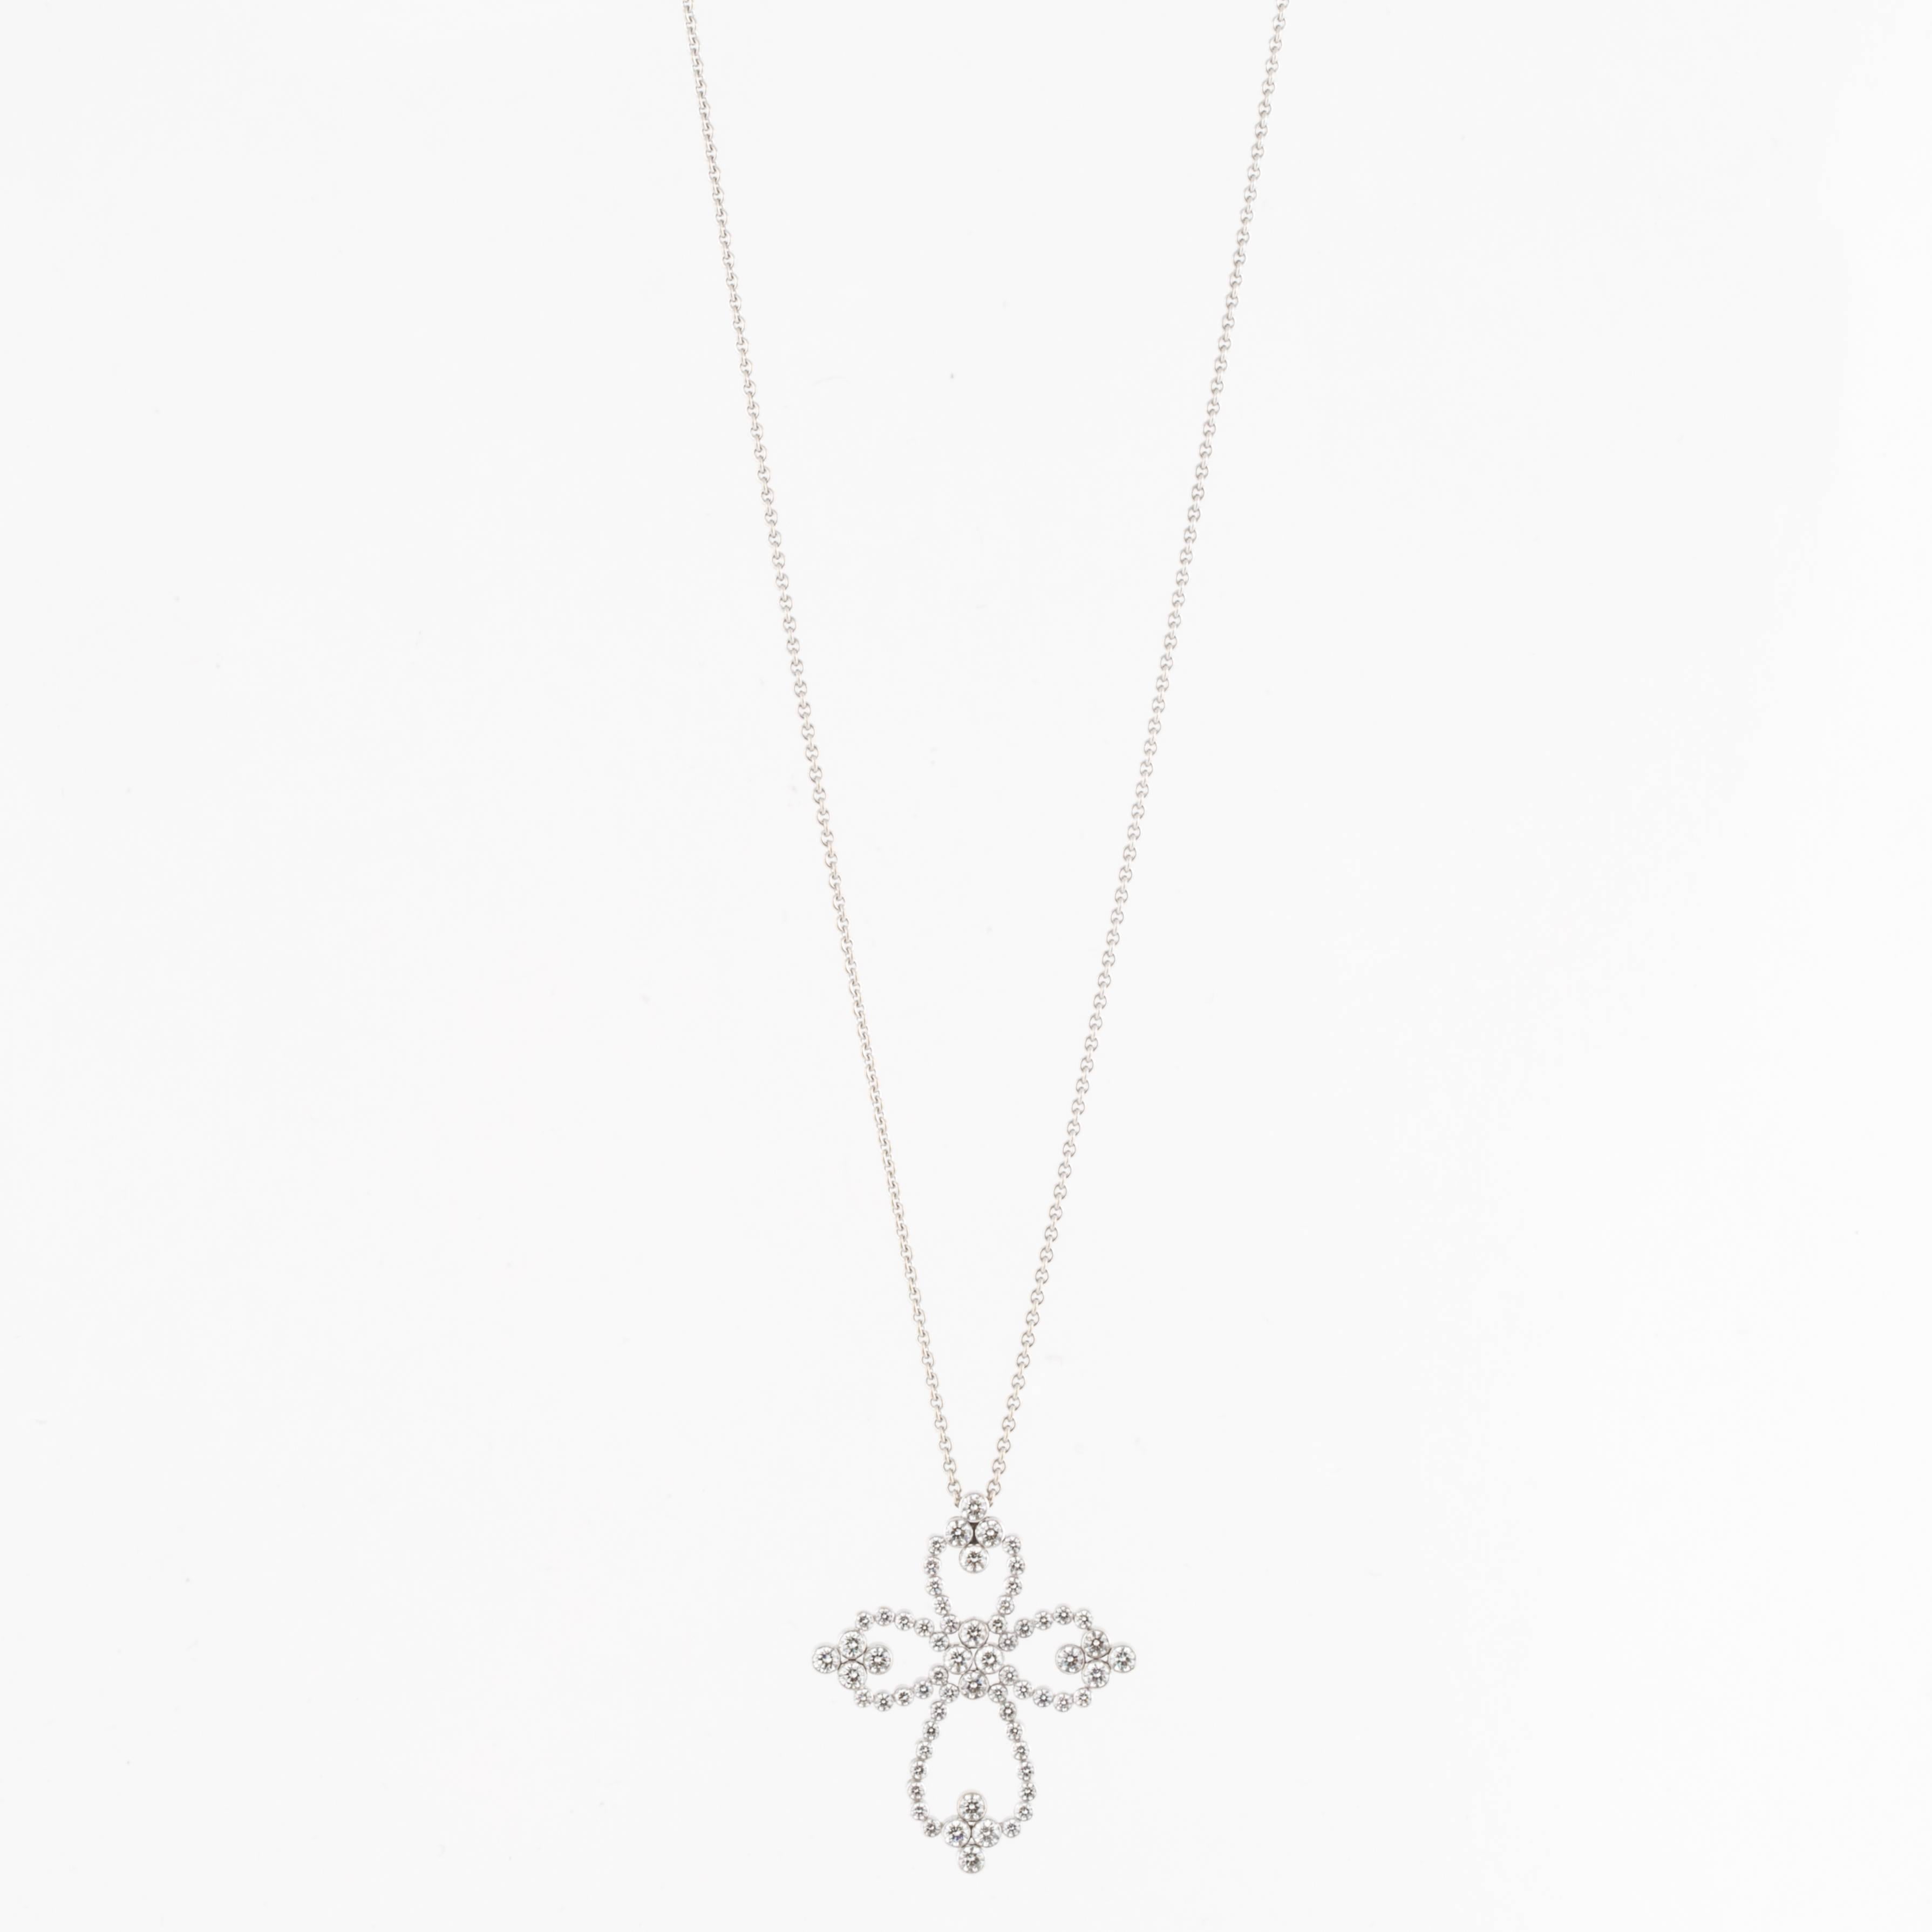 Diamond cross pendant necklace composed of 18K white gold. There are fifty-two (52) round diamonds that total 1.75 carats; F-H color and VS1-SI2 clarity.  The chain measures 16 inches long.  The cross measures 1 1/2 inches long and 1 3/16 inches